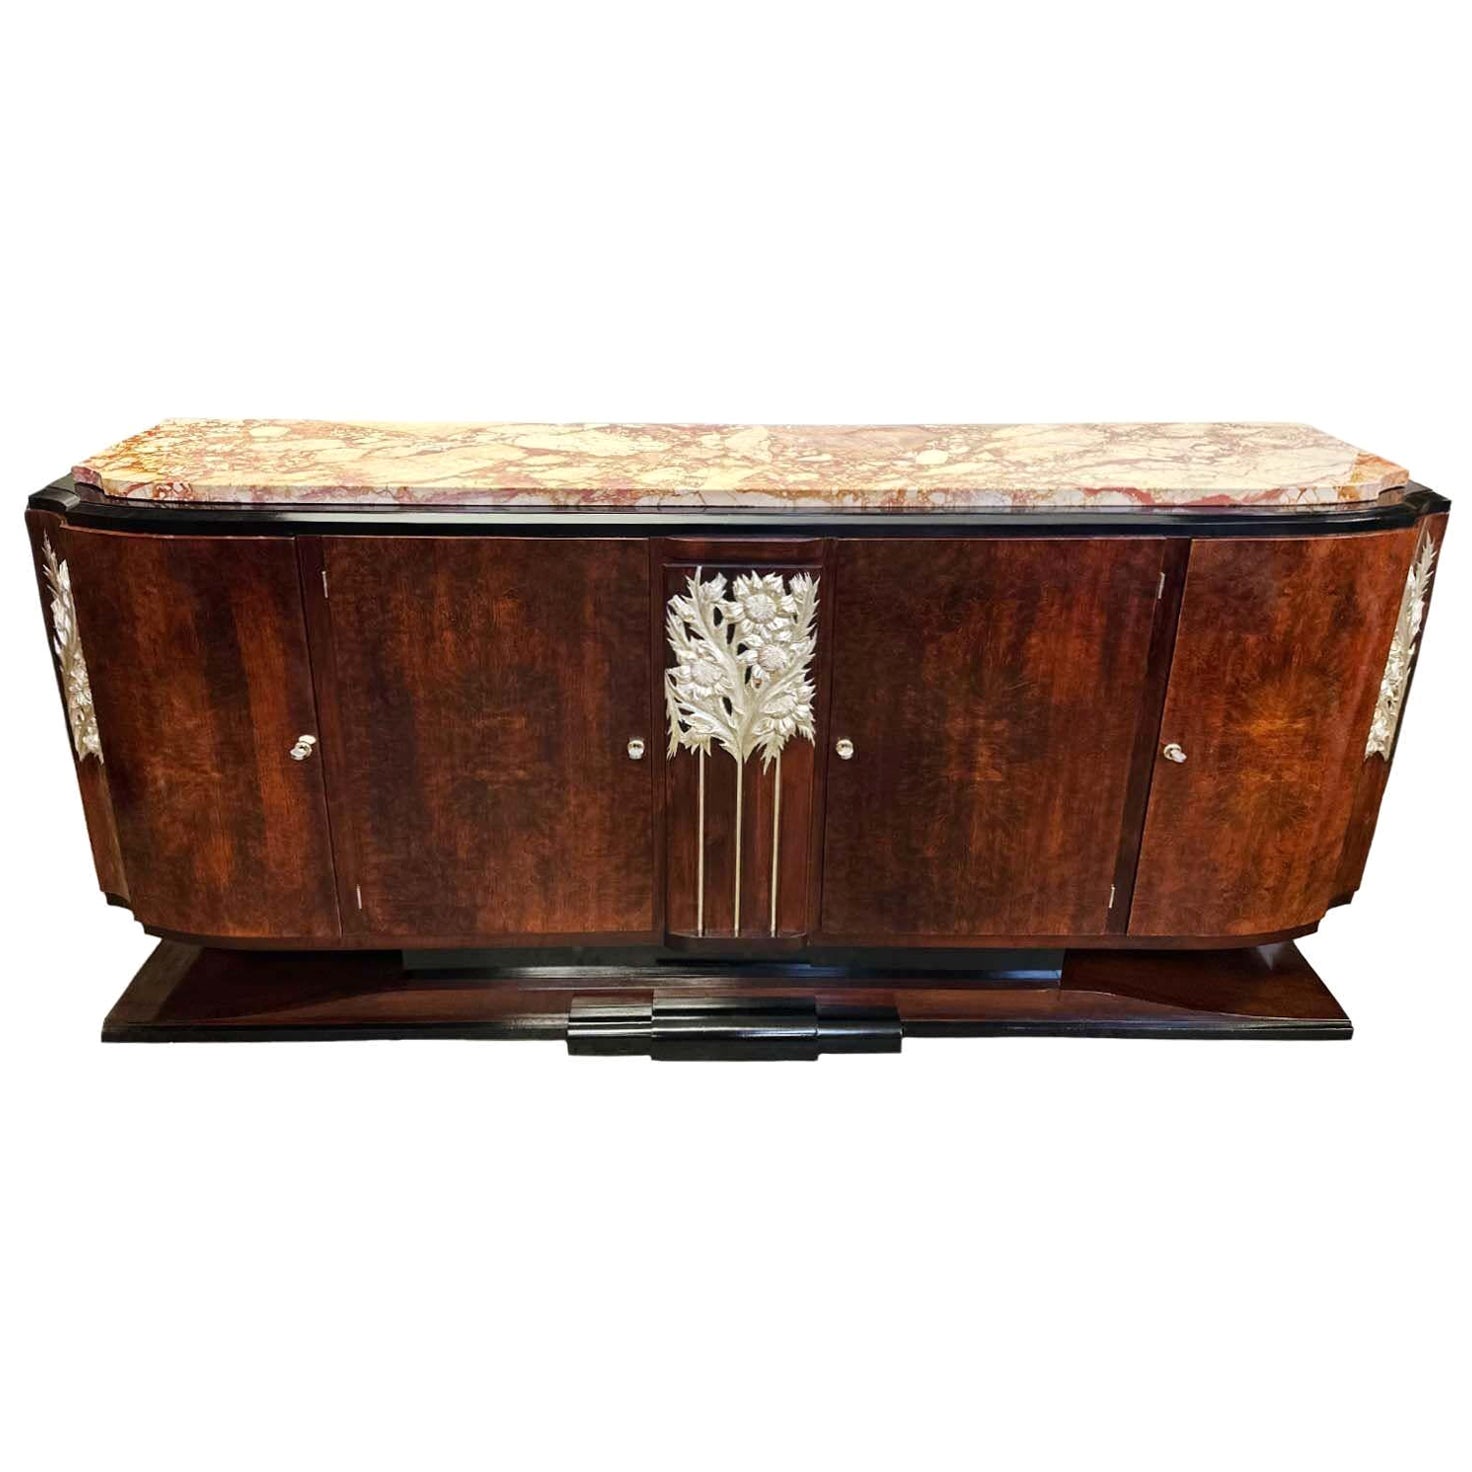 French Art Deco Credenza with Marble Top, c. 1920's For Sale